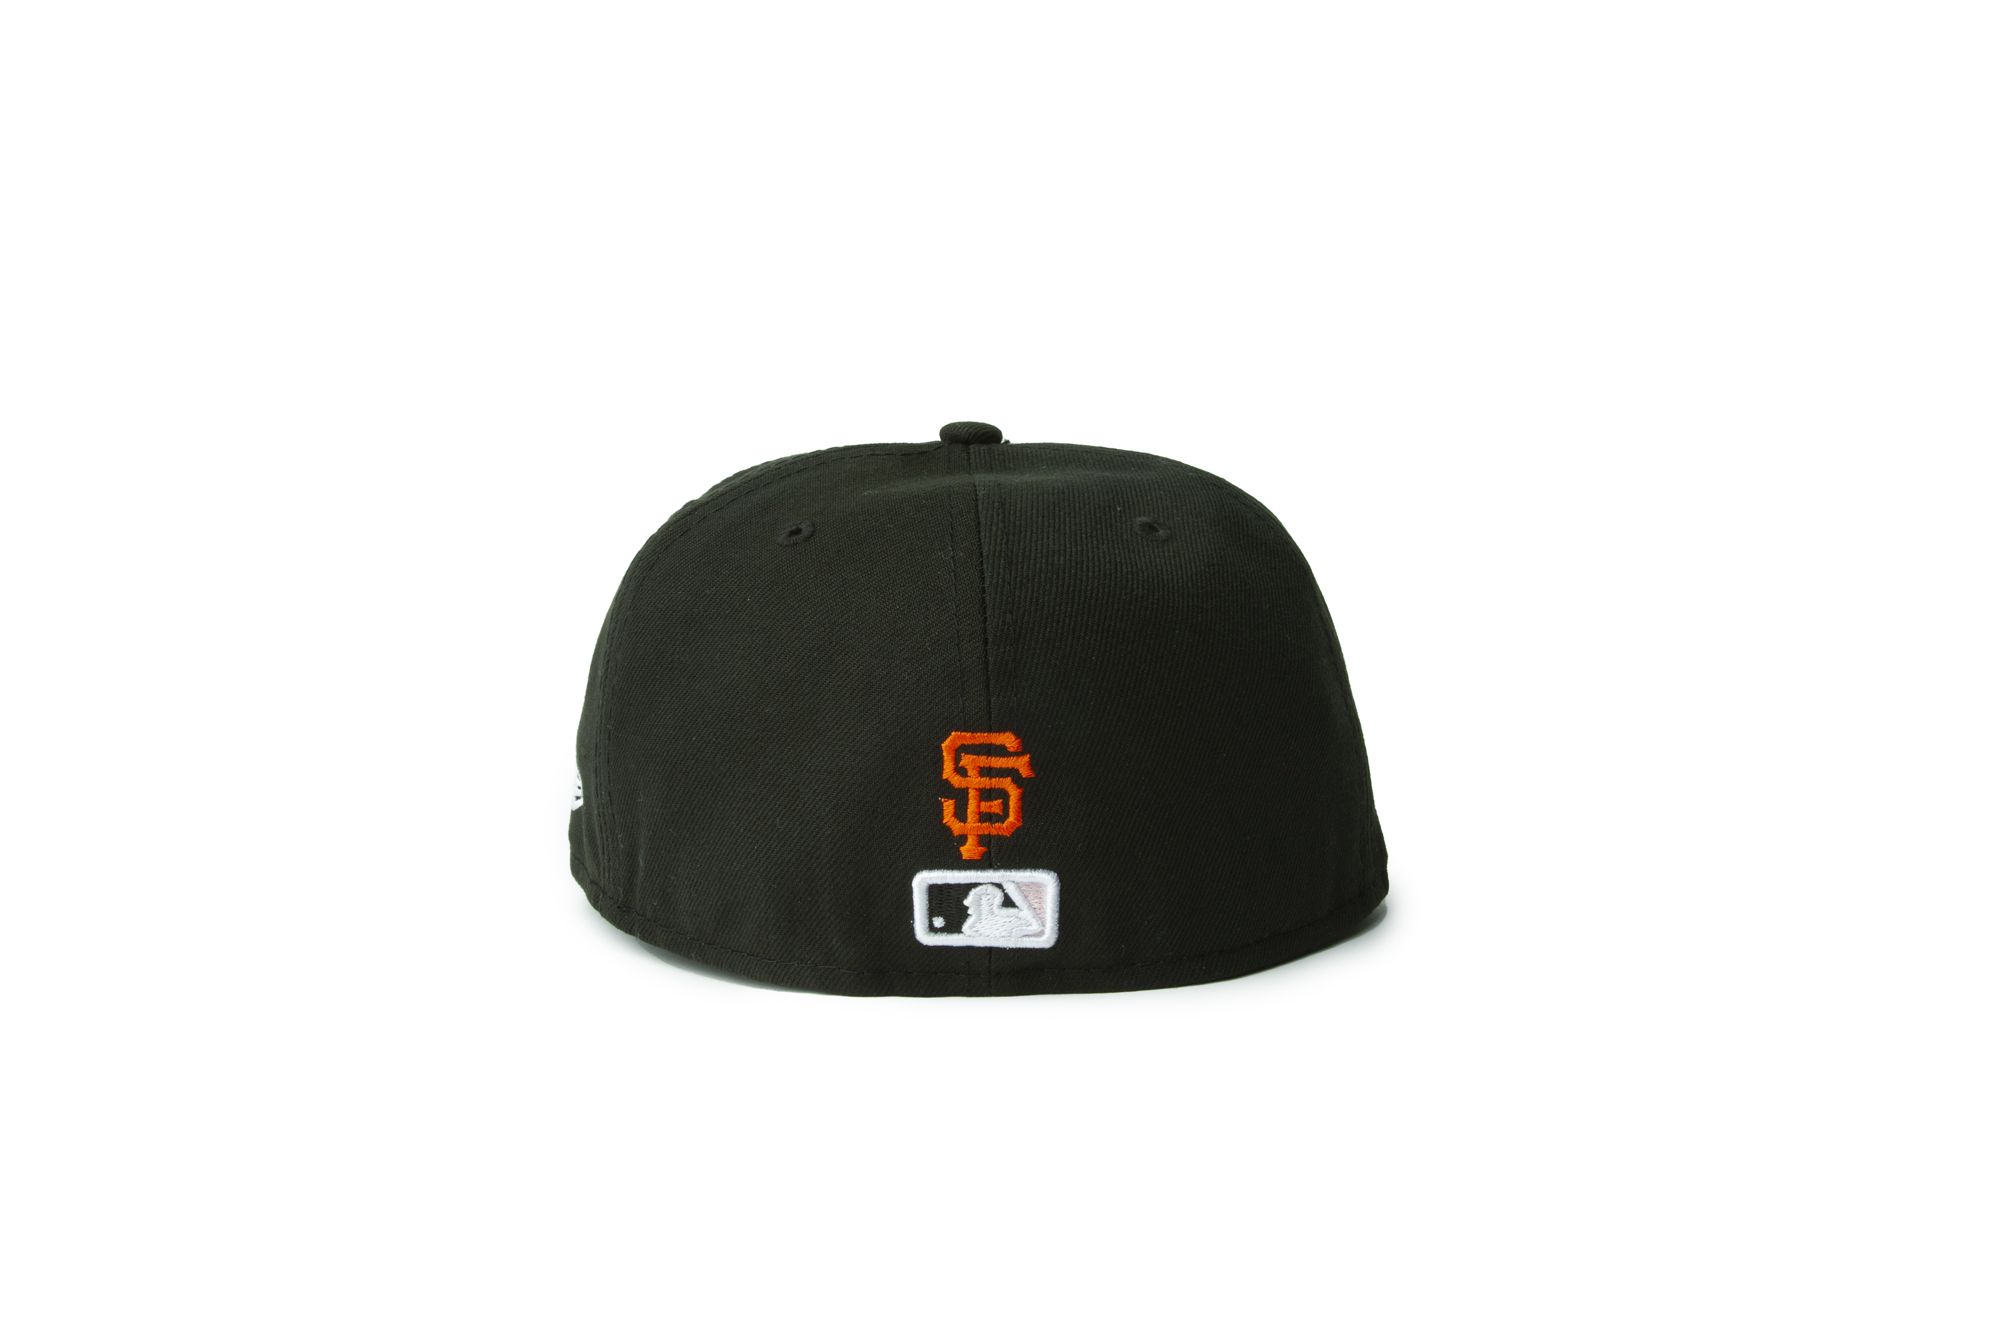 New Era San Francisco Giants Fuji 2010 World Series Patch Hat Club Exclusive 59FIFTY Fitted Hat Grey/Black